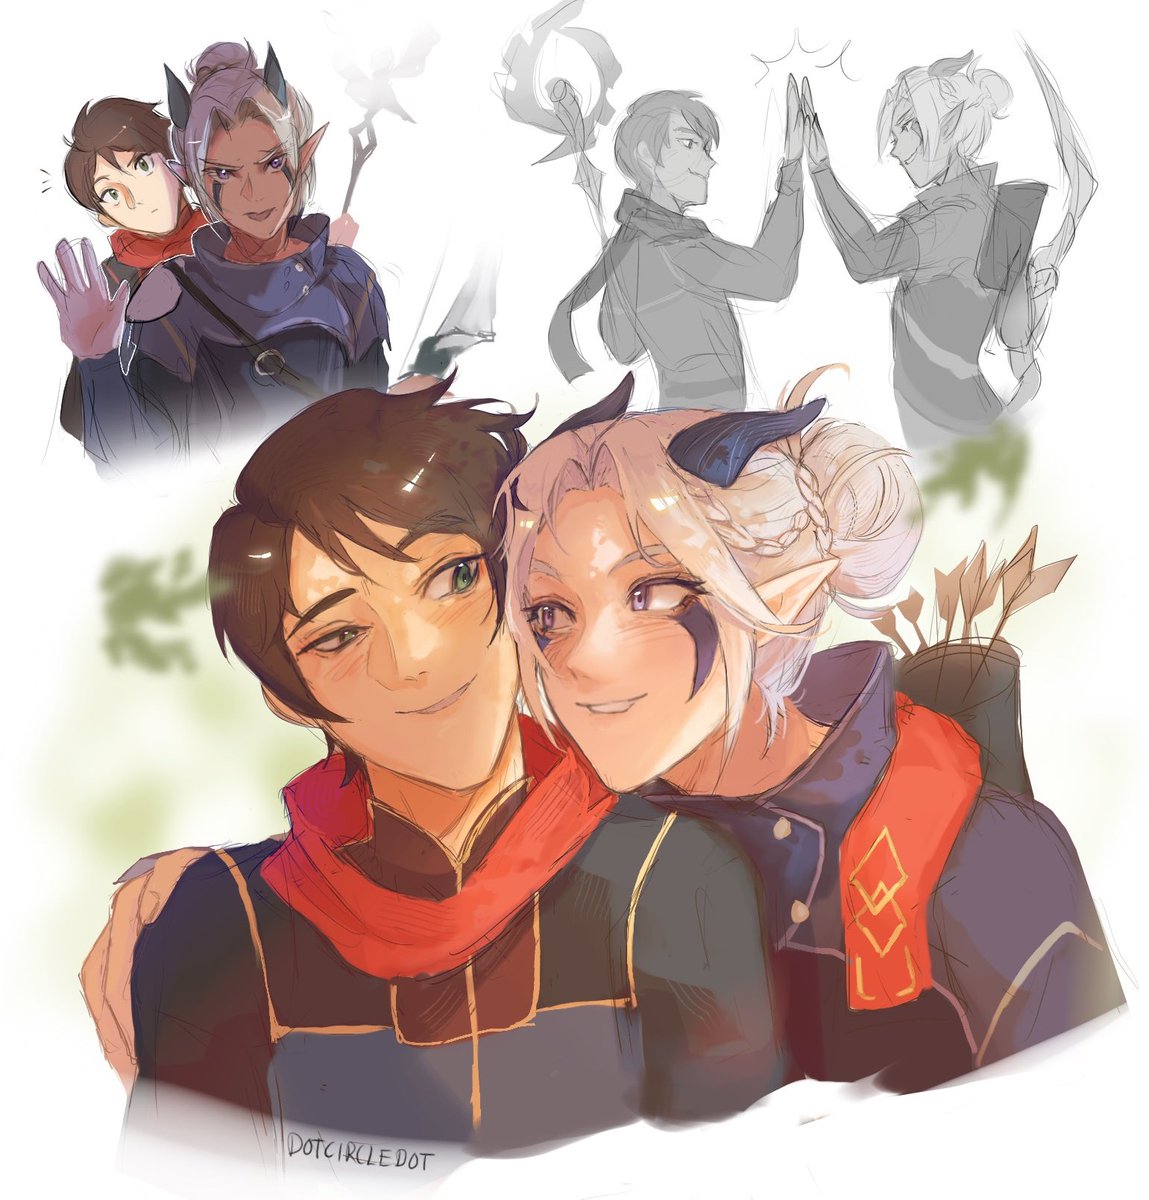 the platonic aspect of their relationship is so important to me #TheDragonPrince